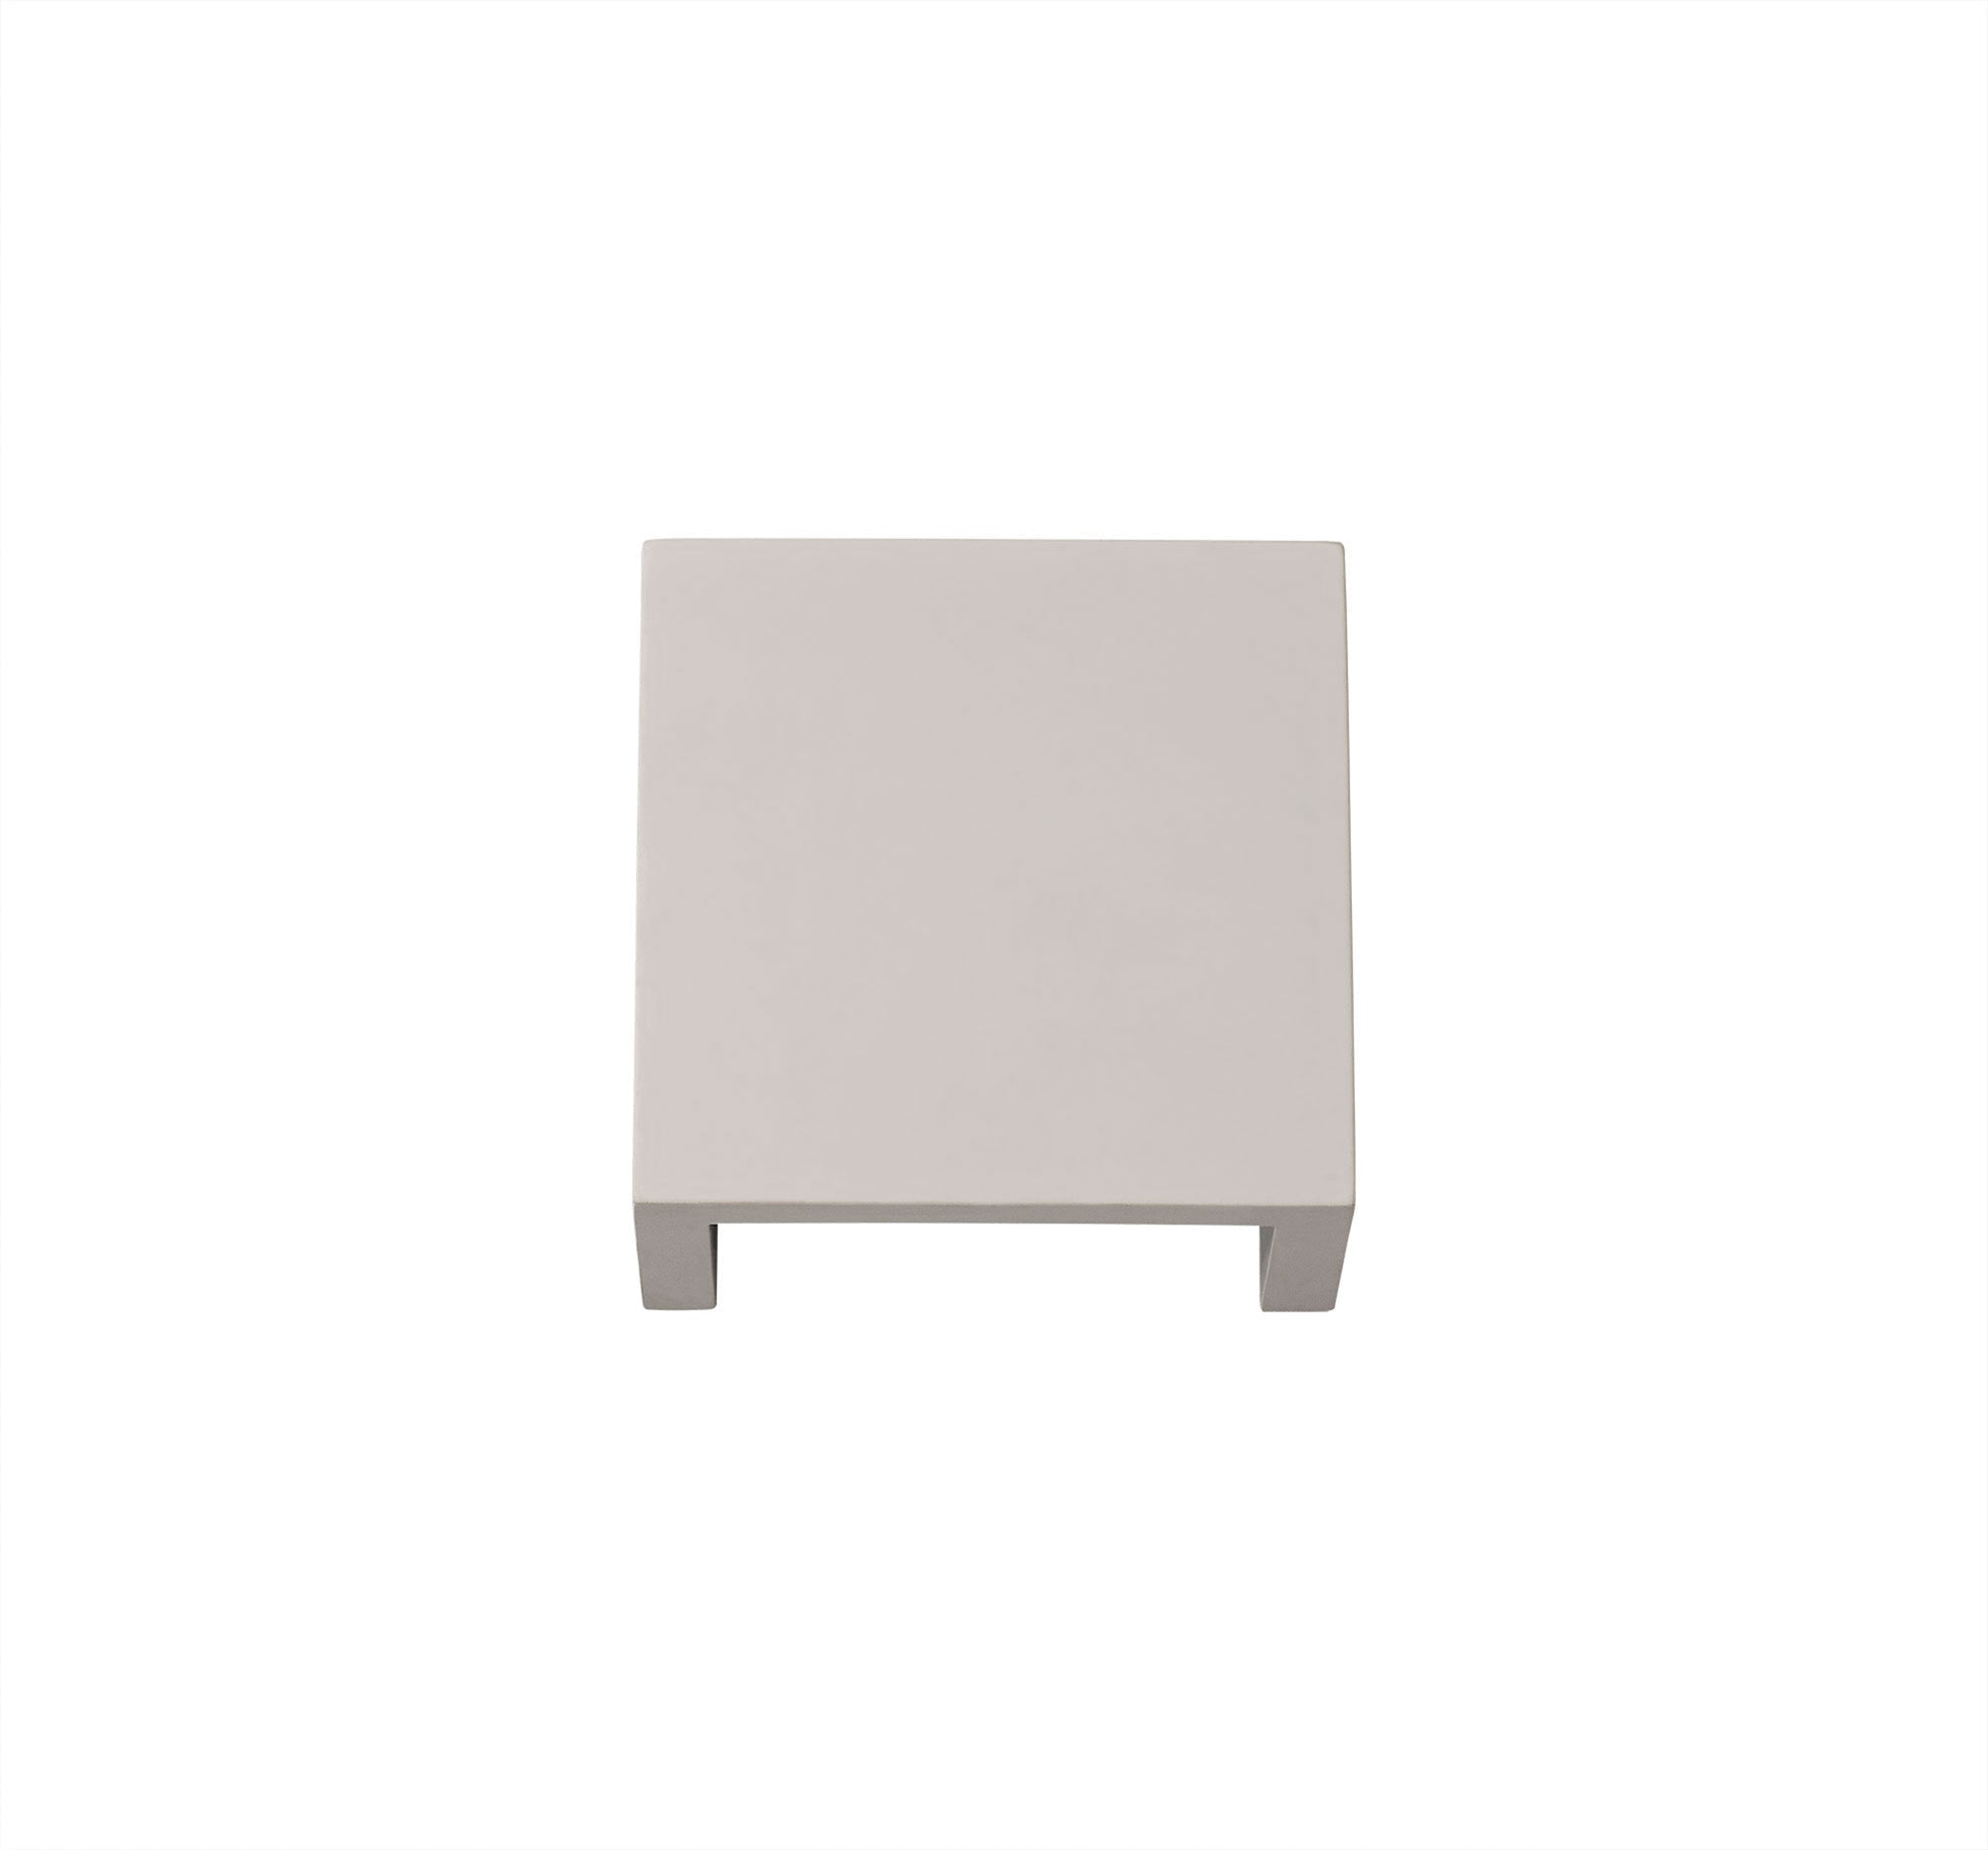 Alina Square Wall Lamp, 6.5W LED, 3000K, 592lm, White Paintable Gypsum, 3yrs Warranty